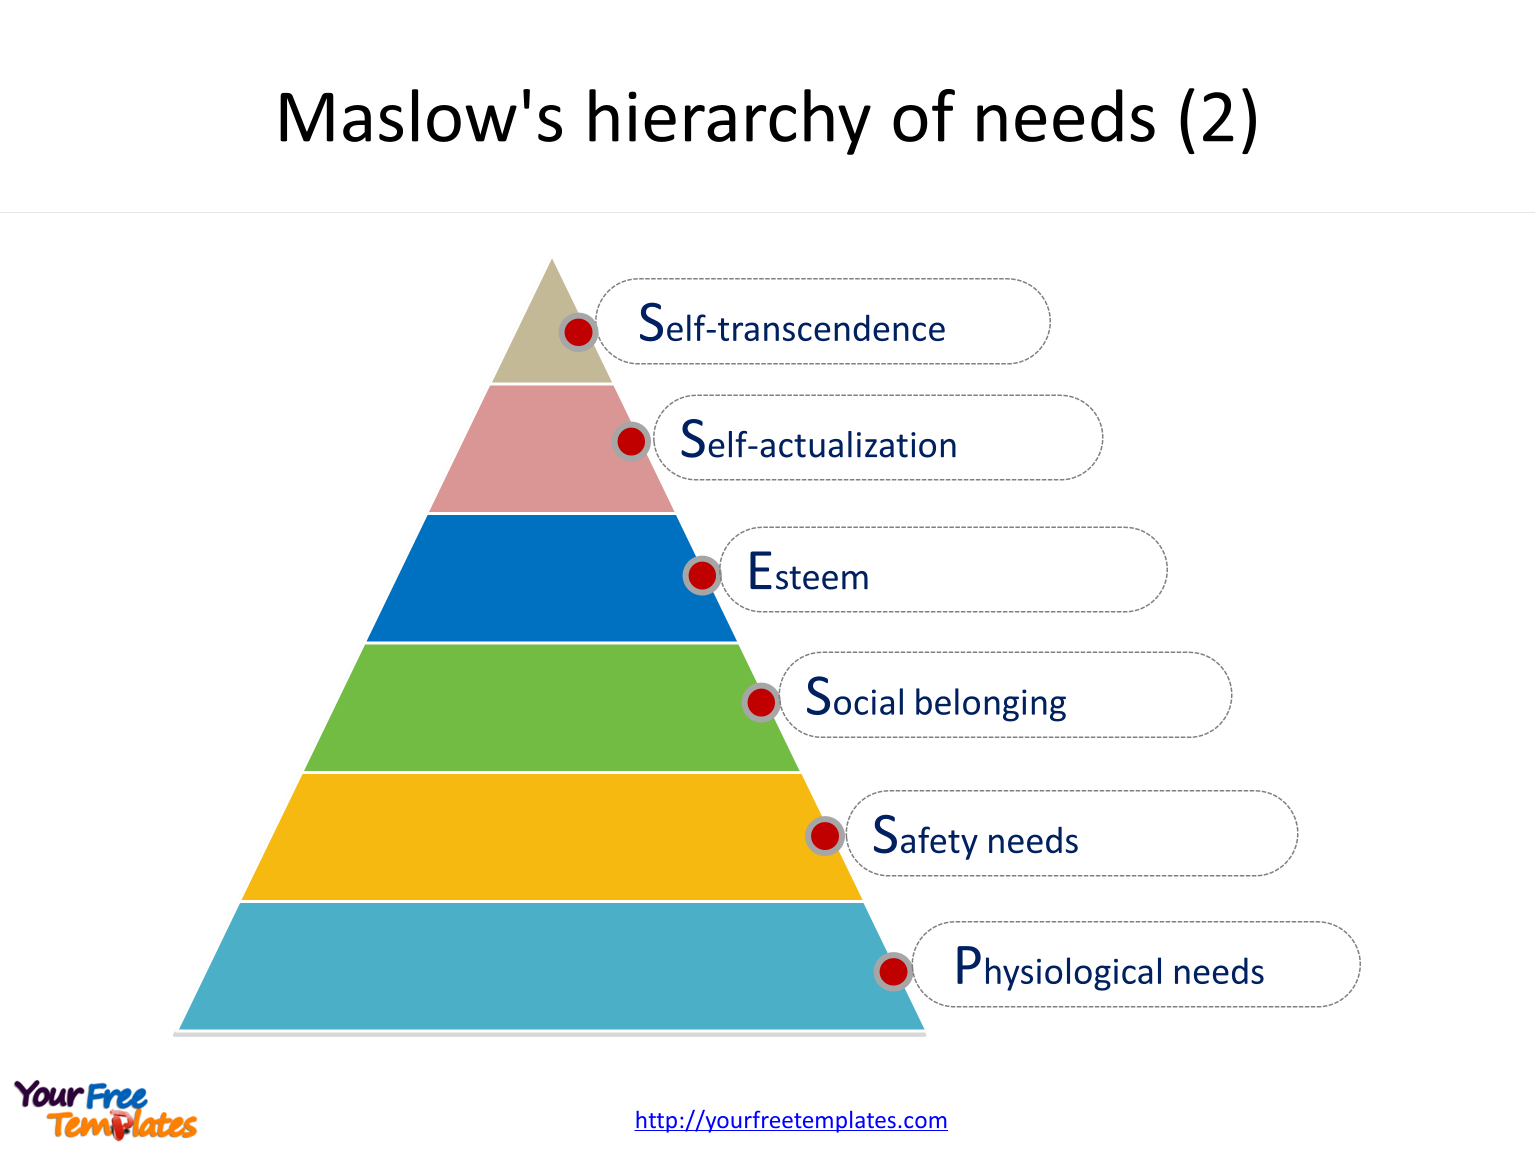 Maslow’s hierarchy of needs of five levels